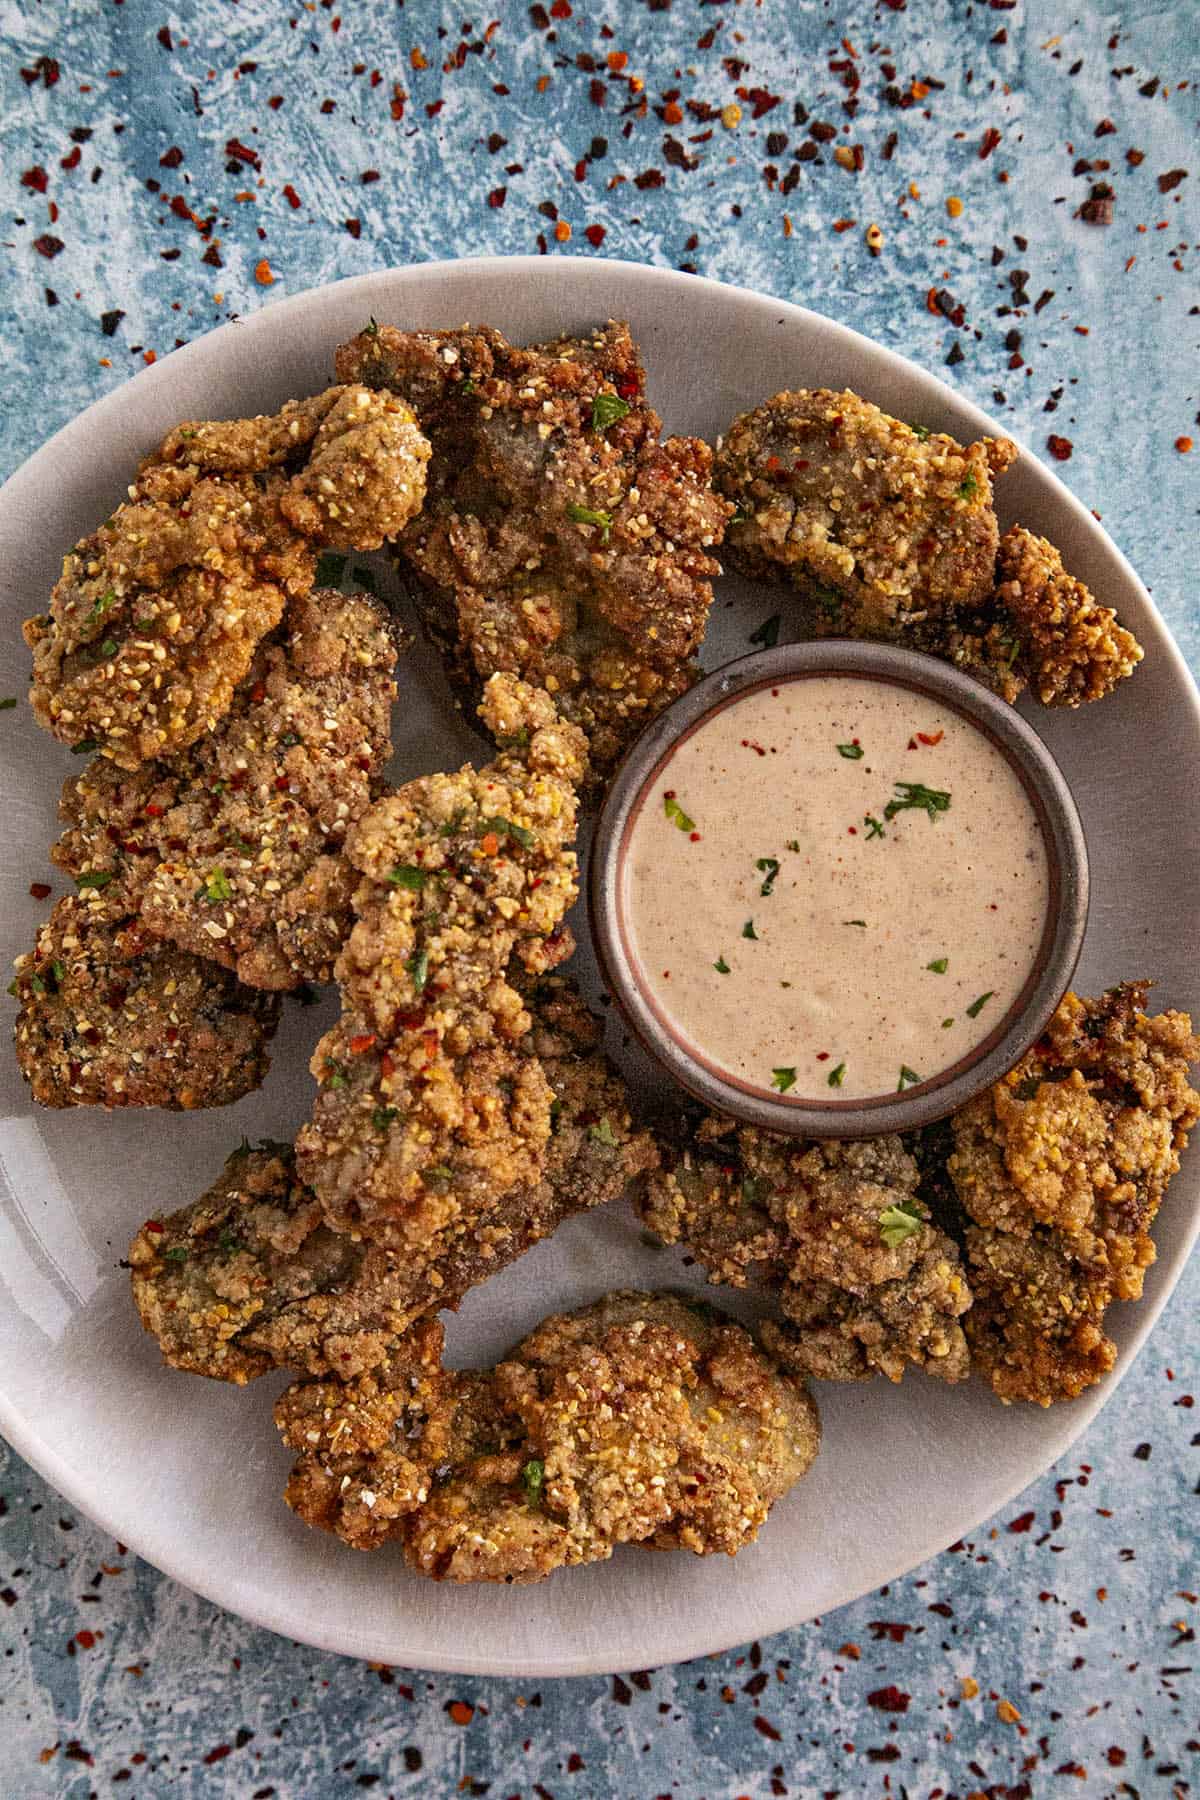 Fried oysters on a plate with creamy remoulade sauce